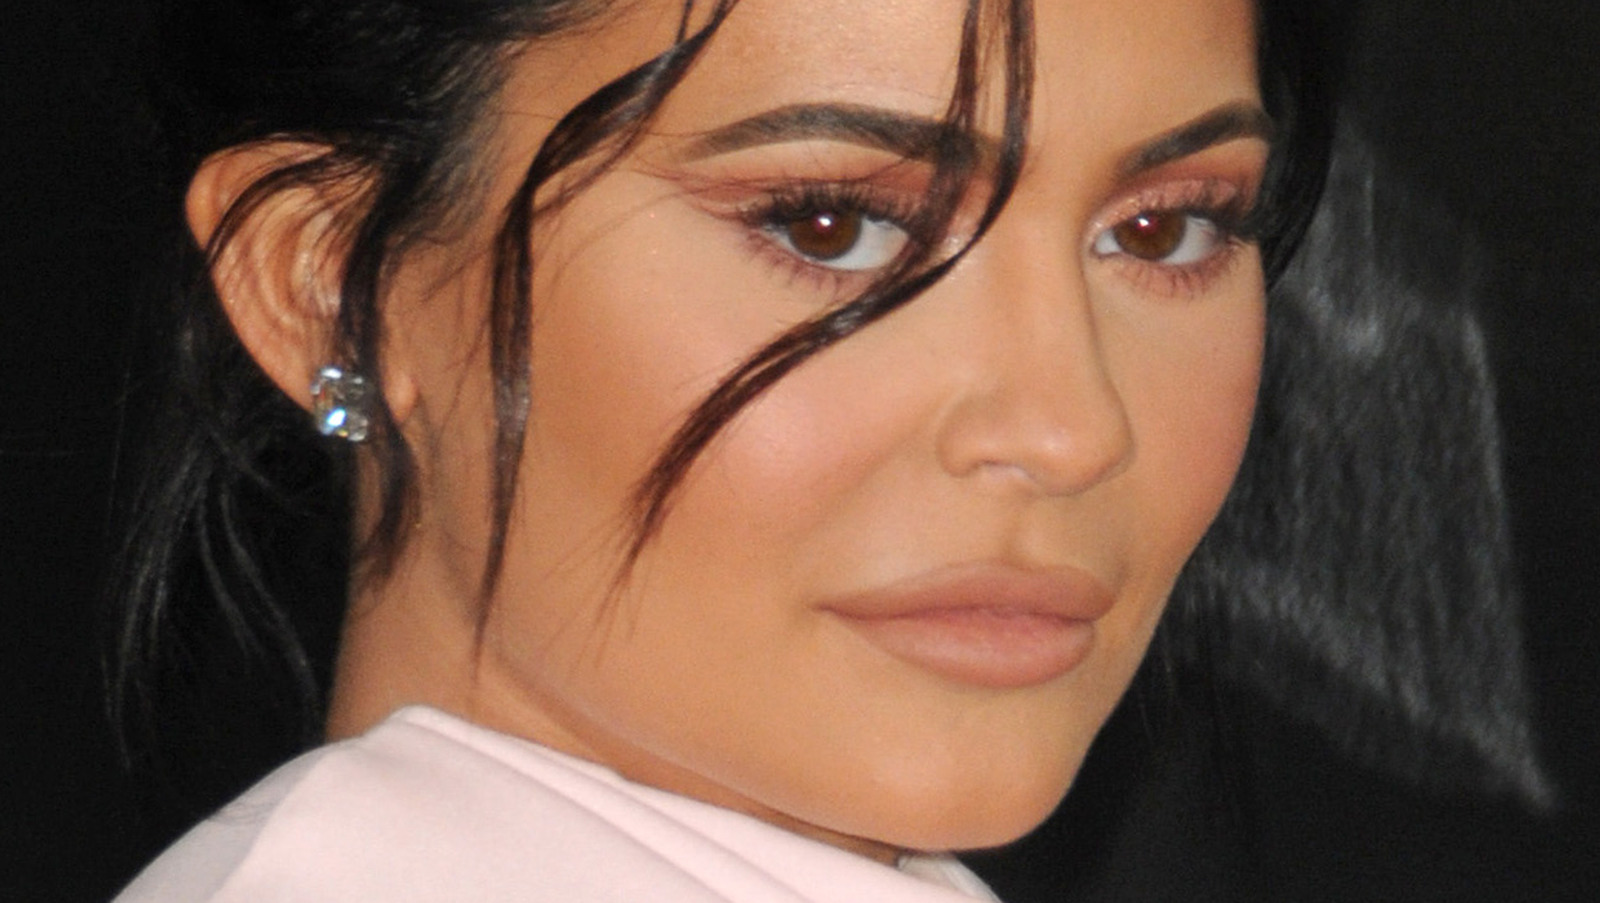 The Moment Kylie Jenner Wishes KUWTK Cameras Didn’t Capture